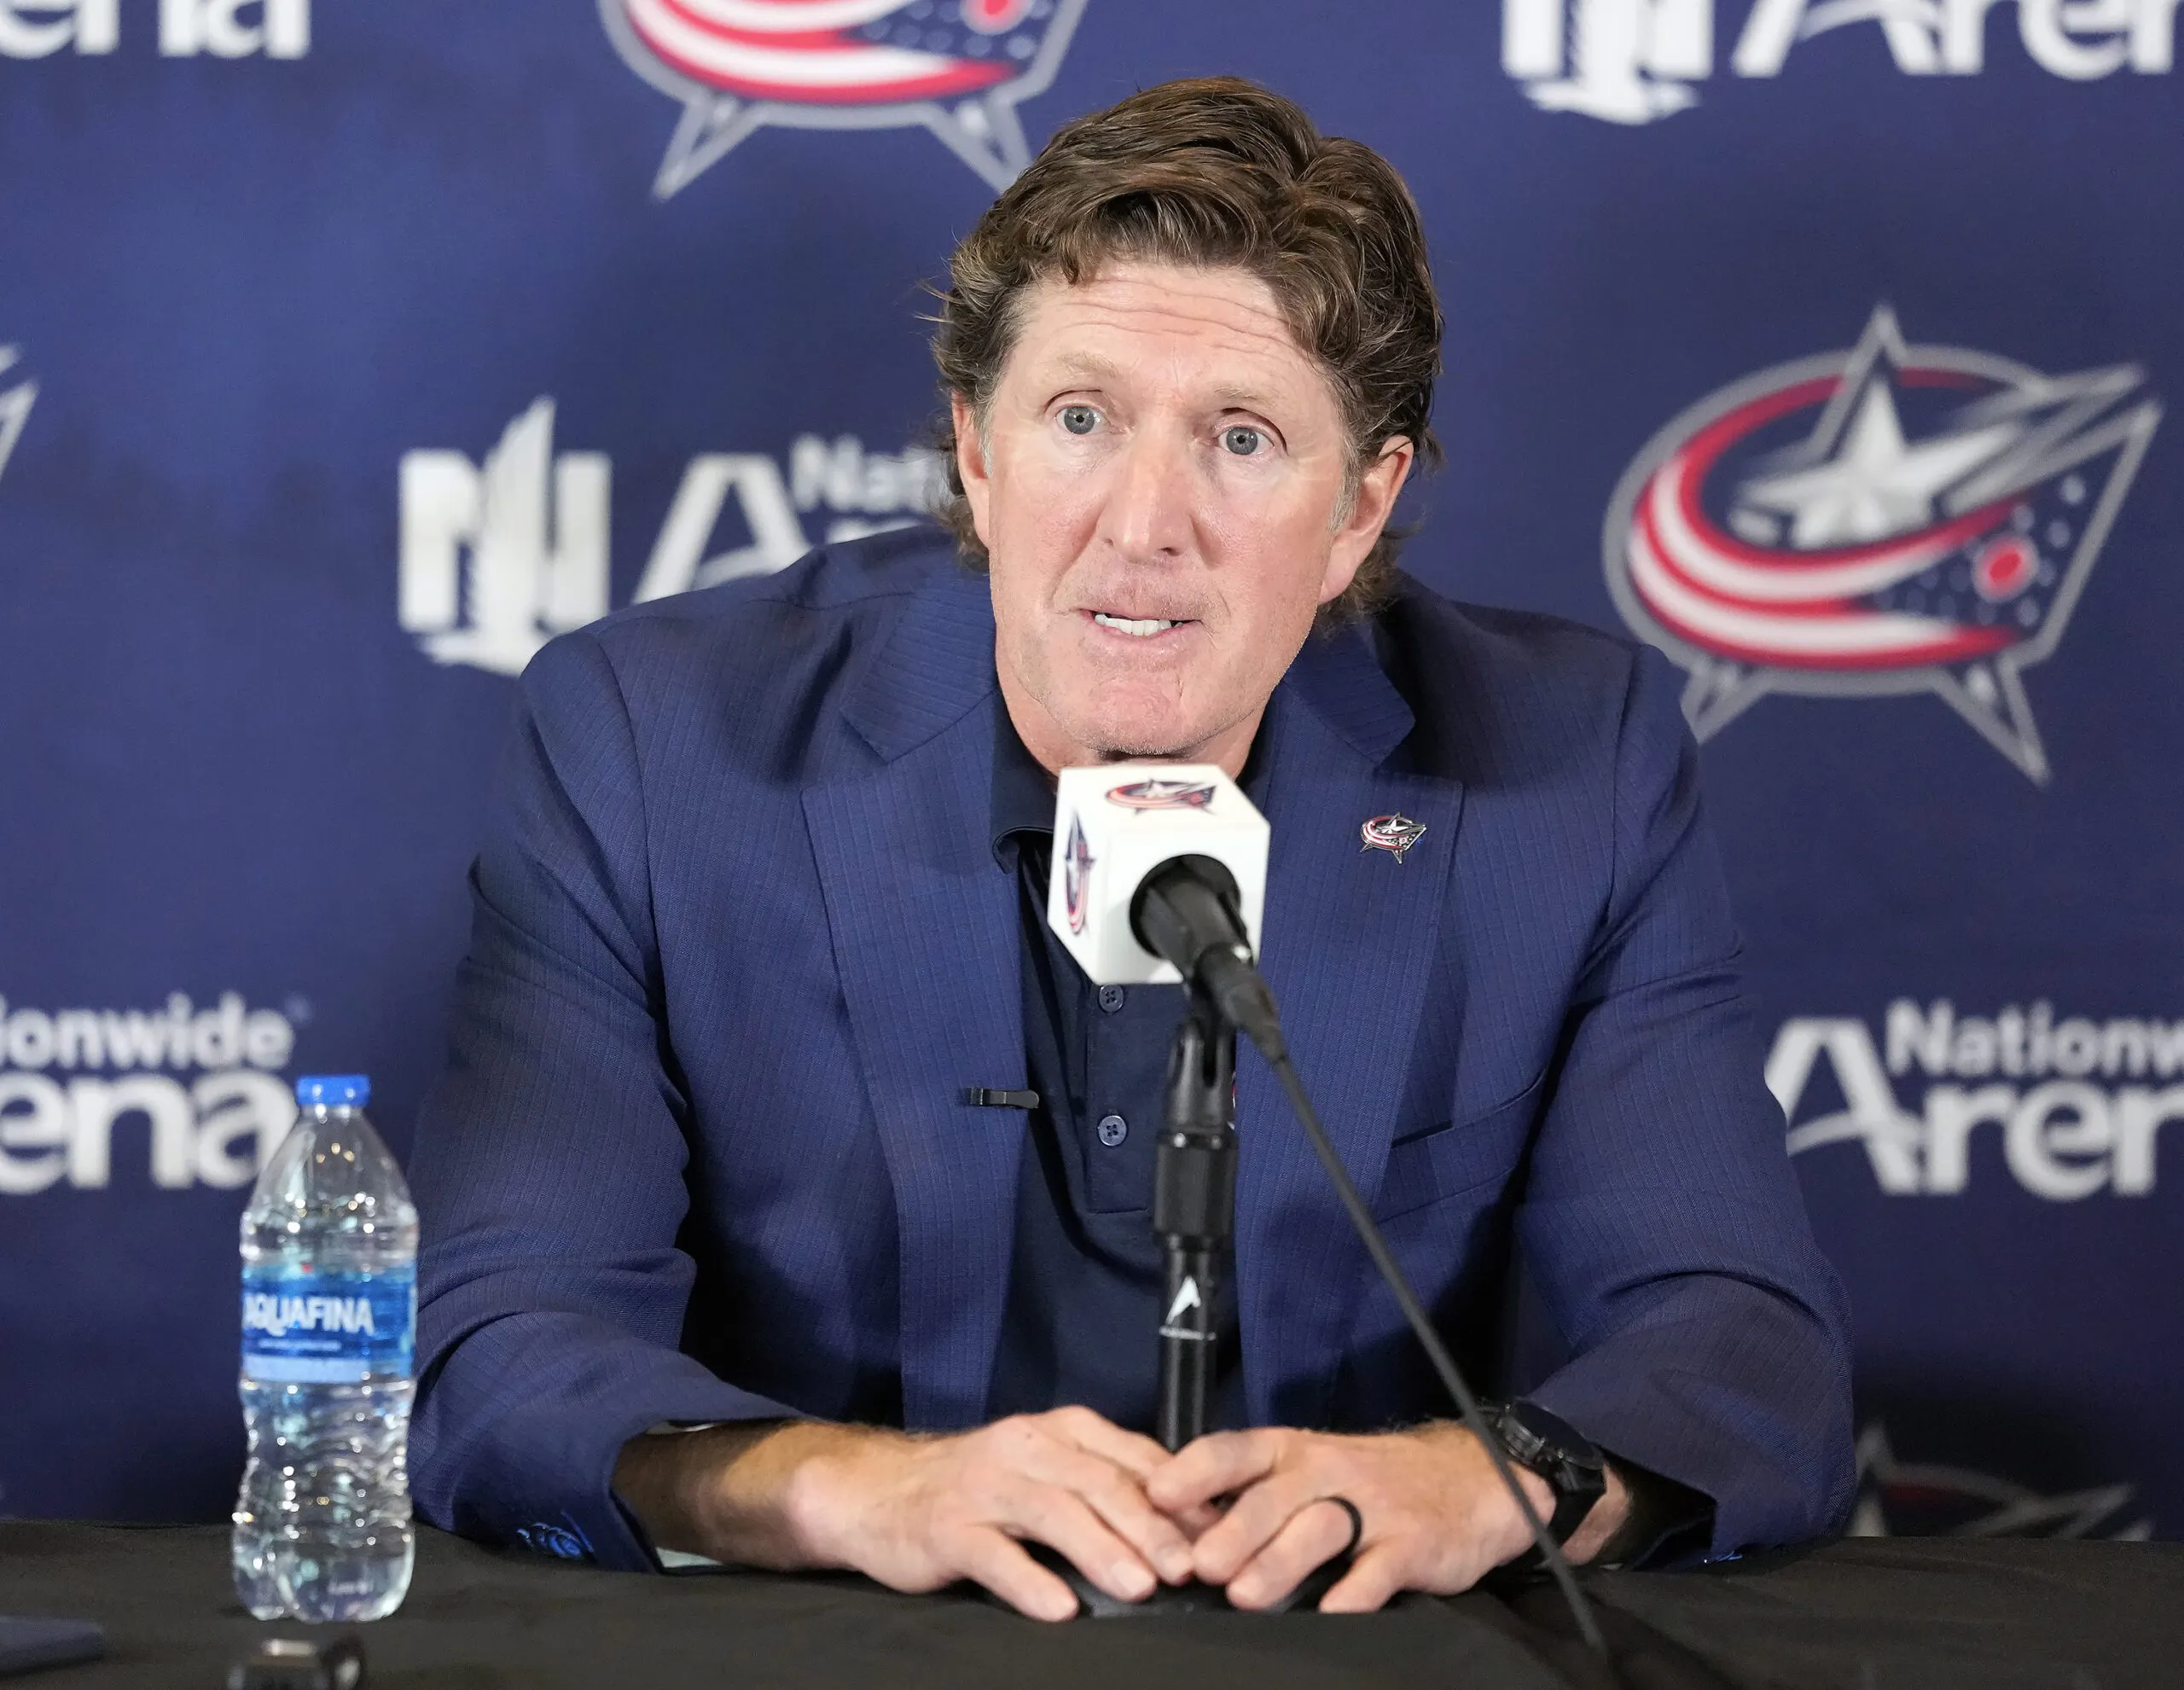 Mike Babcock, Boone Jenner respond to invasion of privacy allegations: ‘Gross misrepresentation of those meetings’